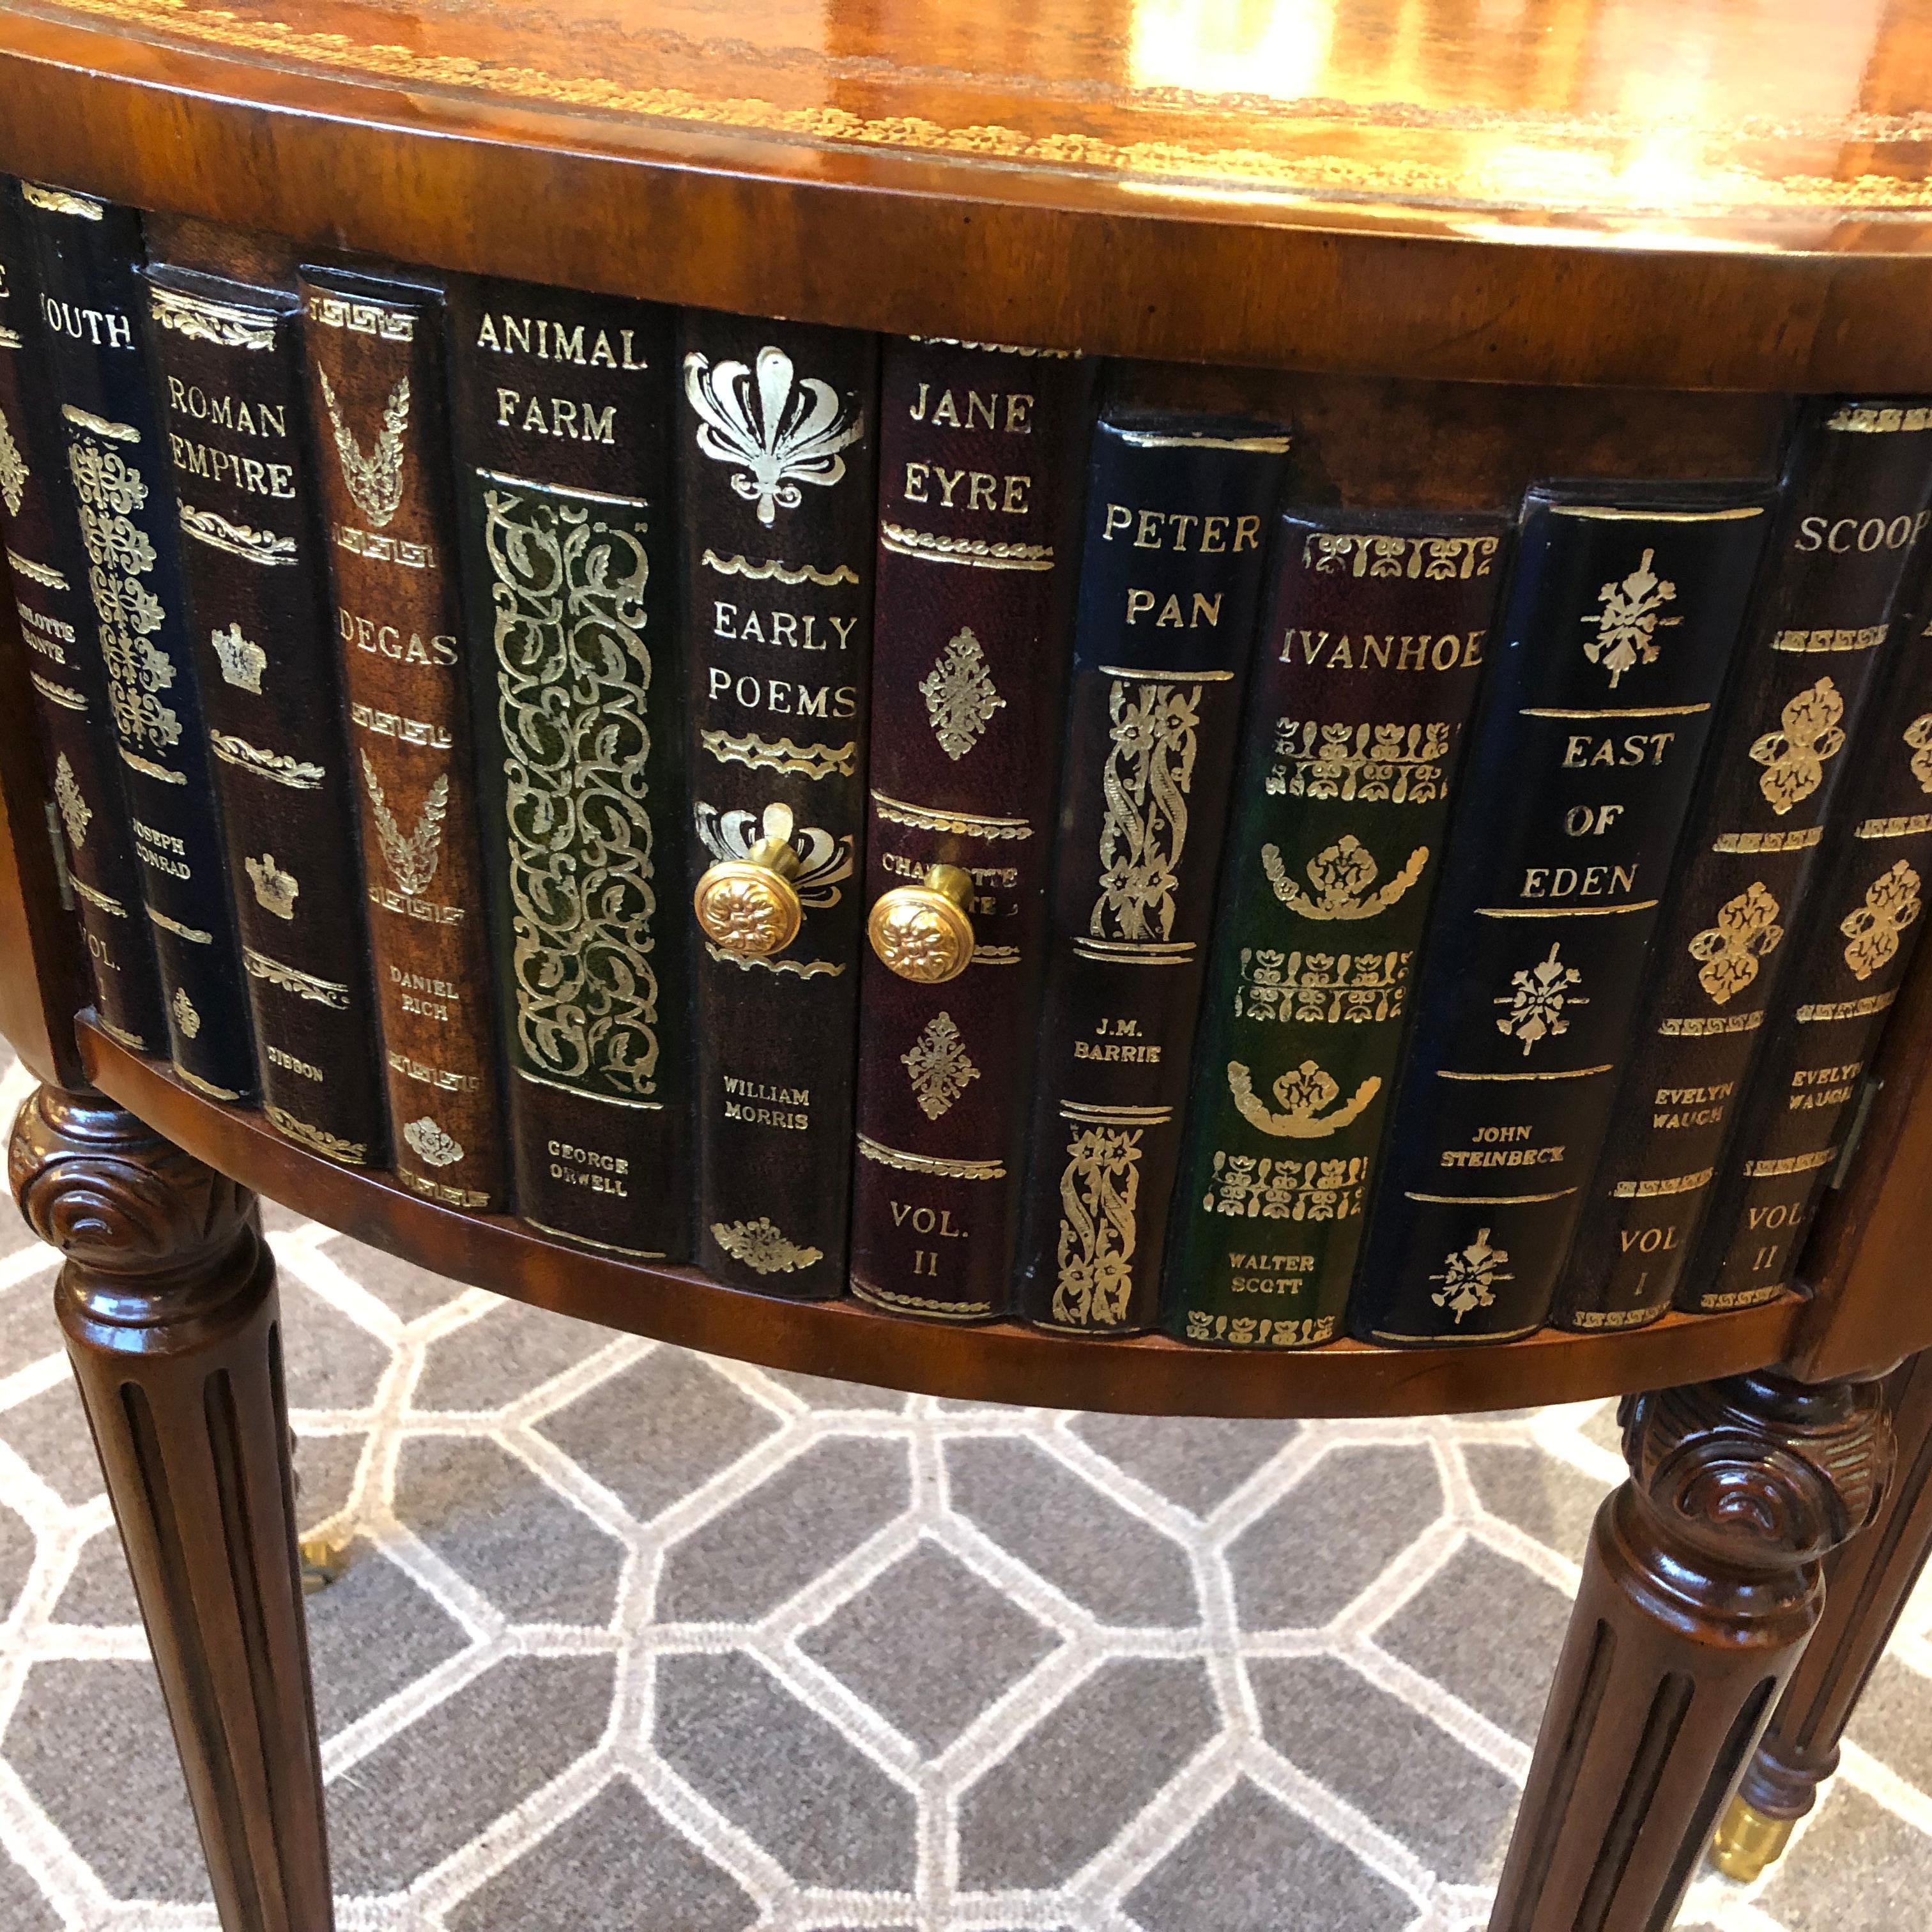 Handsome leather wrapped center table or side table having tooled leather top and trompe l'oeil books around the periphery. There are 3 sets of double doors that open to storage, and 3 sets of 2 drawers. Mahogany legs are carved and terminate in